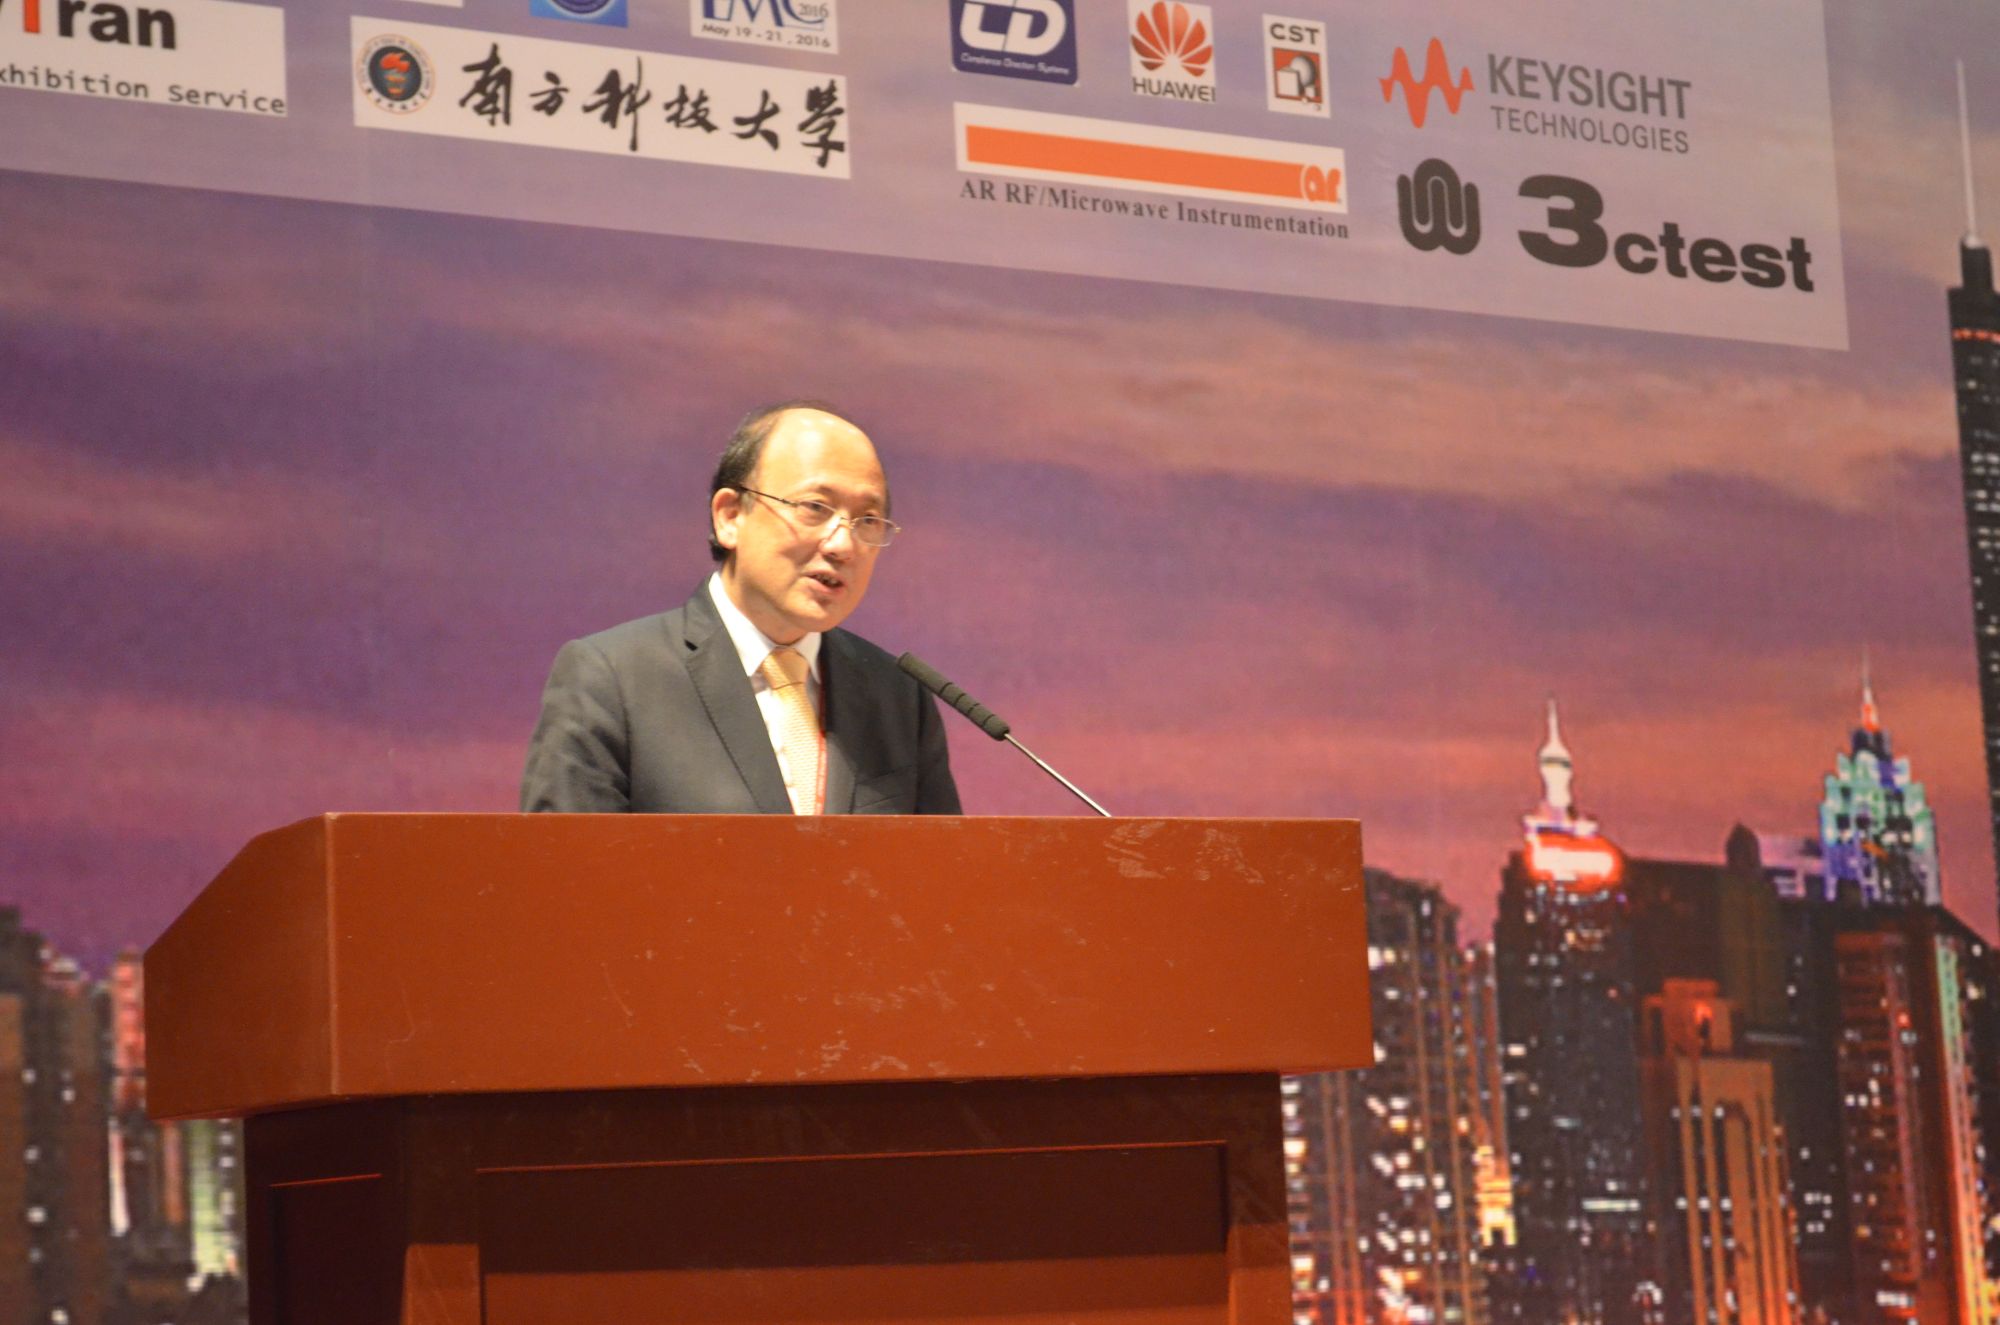 President Chen Shiyi Delivered the Opening Speech at APEMC 2016